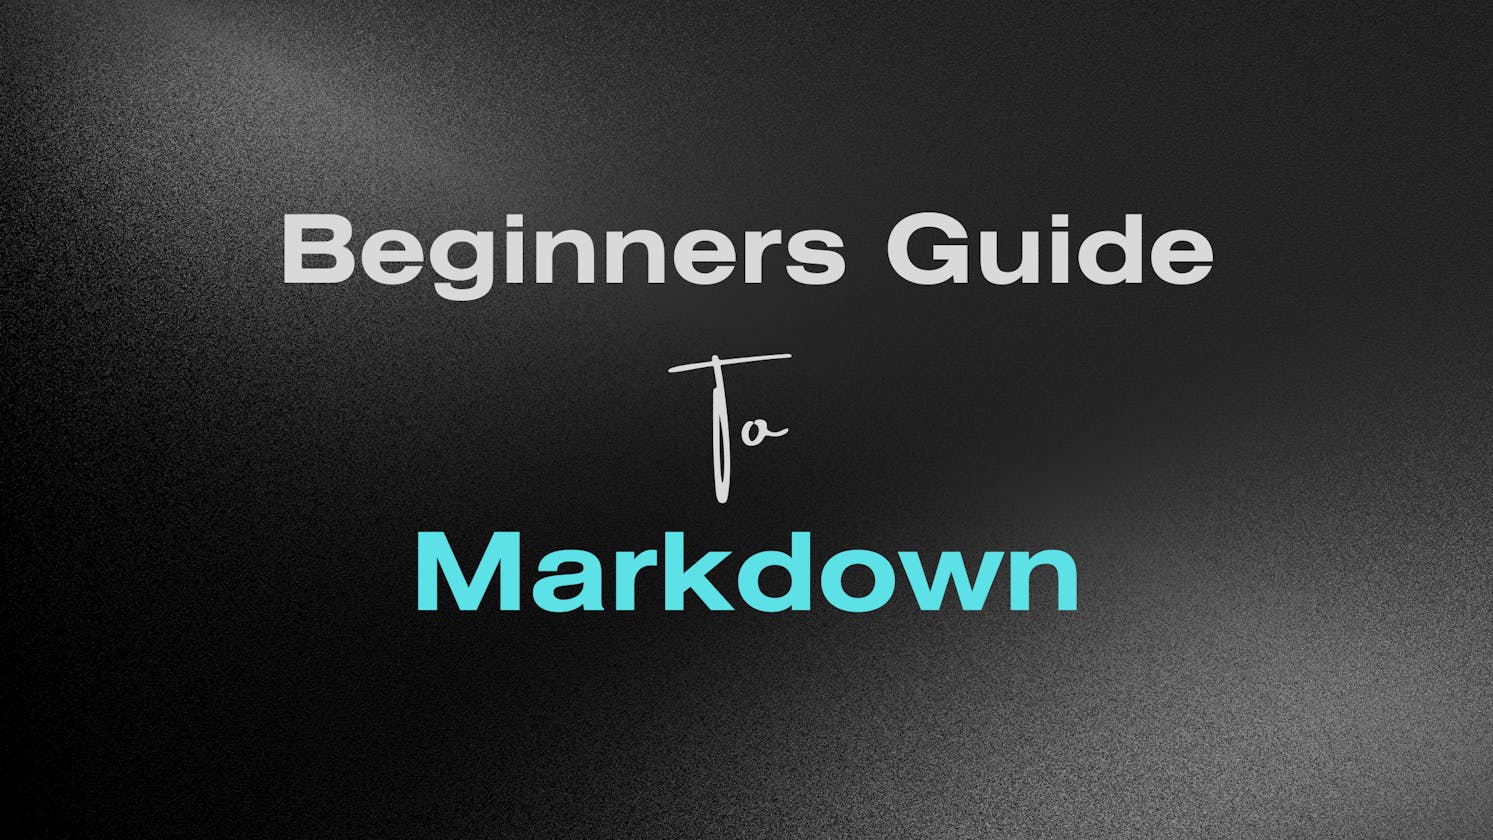 Beginners guide to Markdown